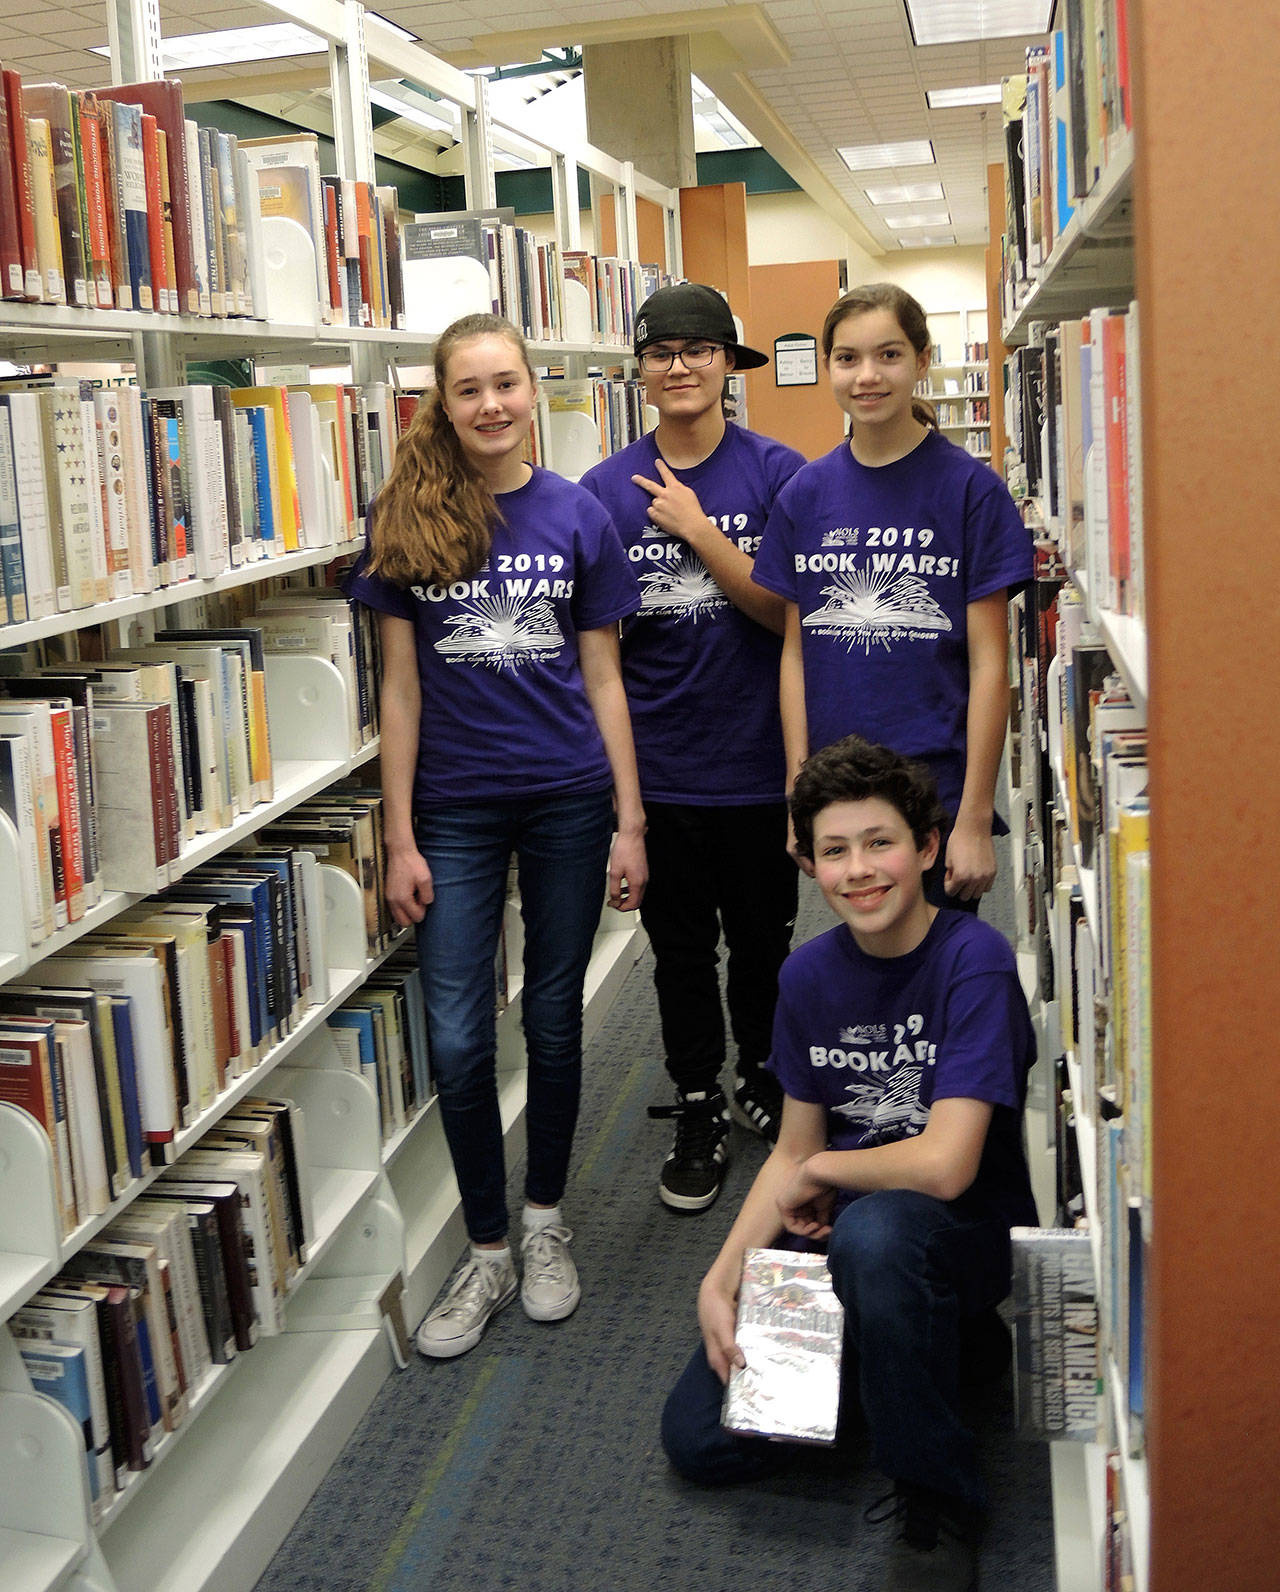 The 2019 Book Wars! winners from Sequim Middle School’s Phoenix Riders team include, from left, Anastasia Updike, Calem Klinger, Kari Olson and (kneeling) Ayden Humphries. Photo courtesy of North Olympic Library System